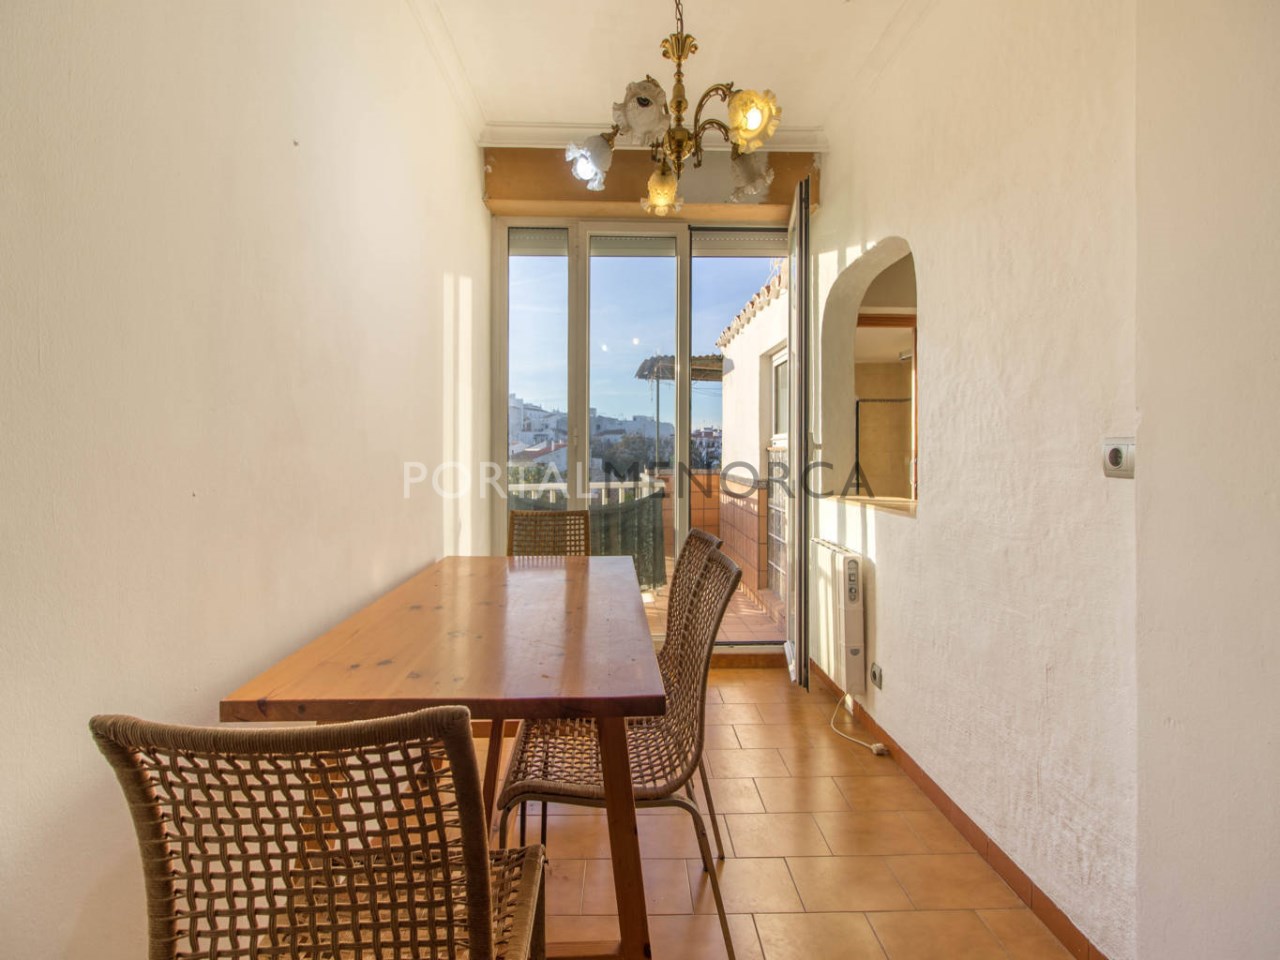 Flat with 3 bedrooms for sale in Mahón